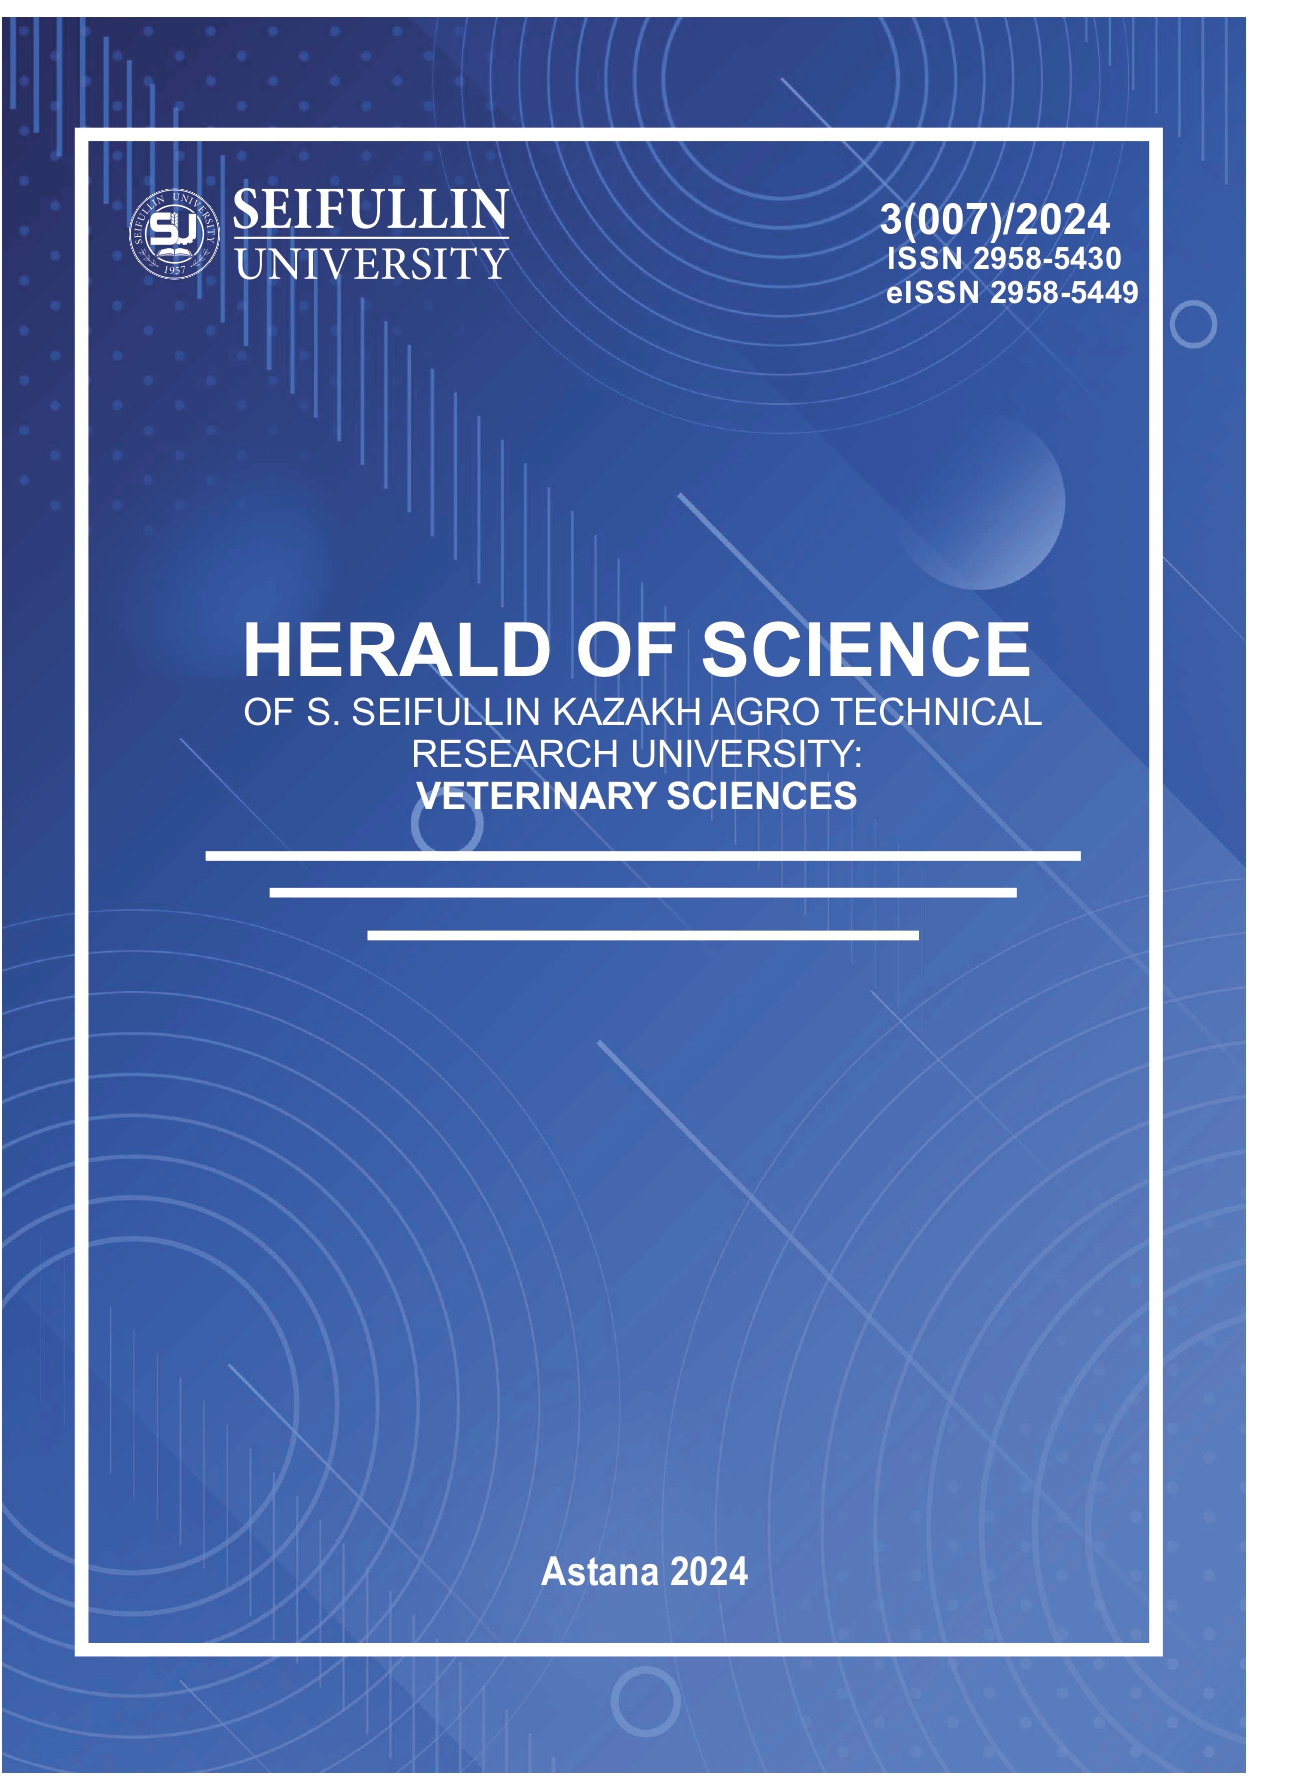 					View No. 3(007) (2024): HERALD OF SCIENCE OF S SEIFULLIN KAZAKH AGRO TECHNICAL RESEARCH UNIVERSITY: VETERINARY SCIENCES
				